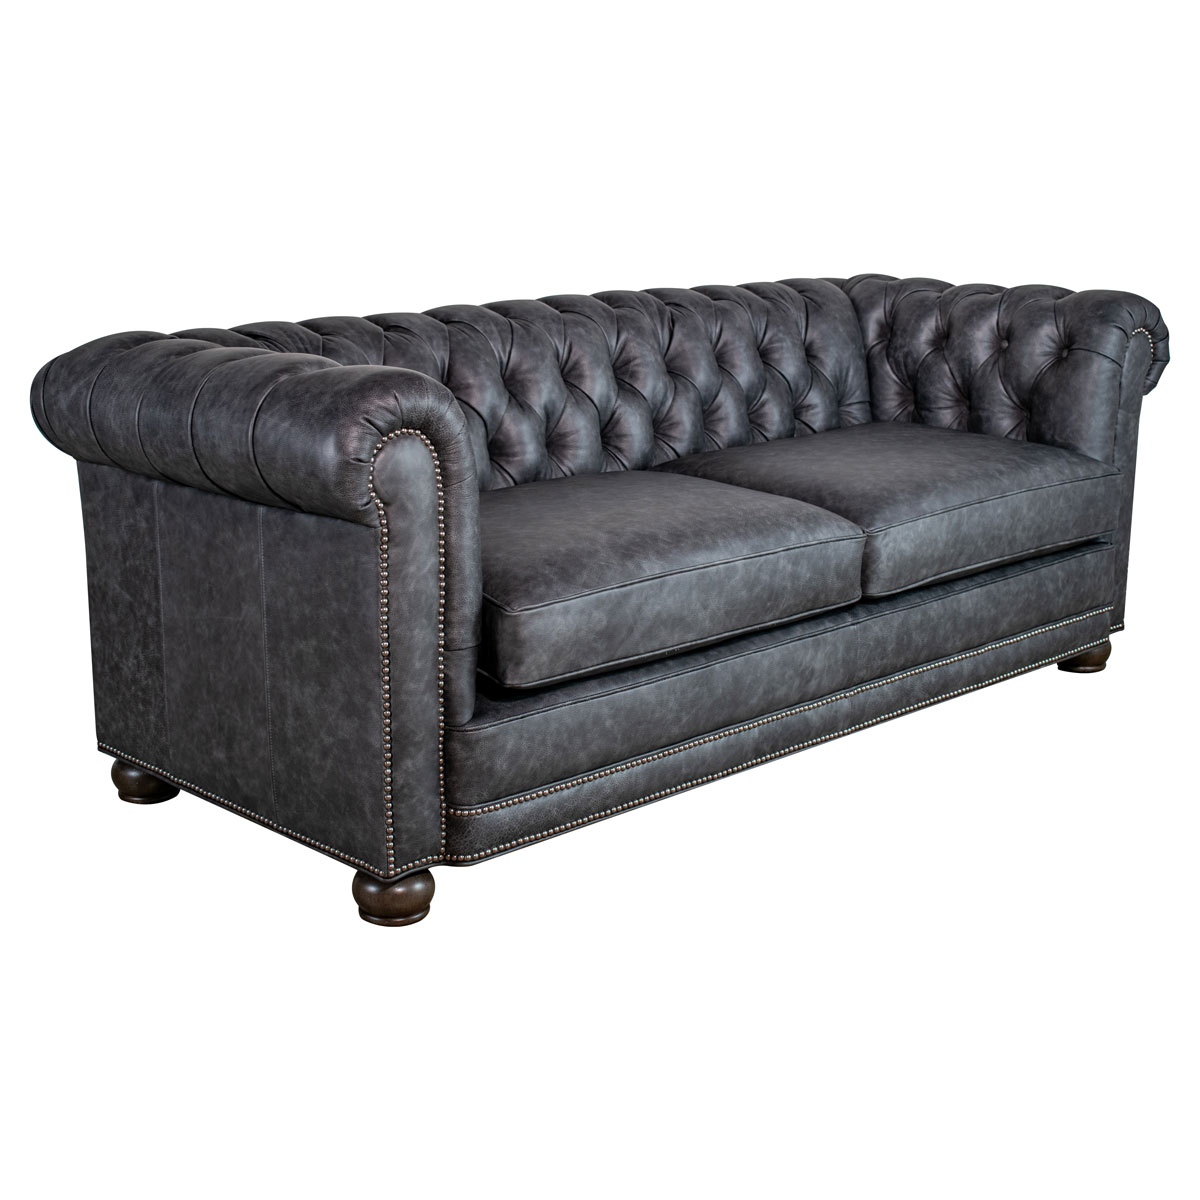 Our House 527-86 Stanhope Chesterfield Sofa